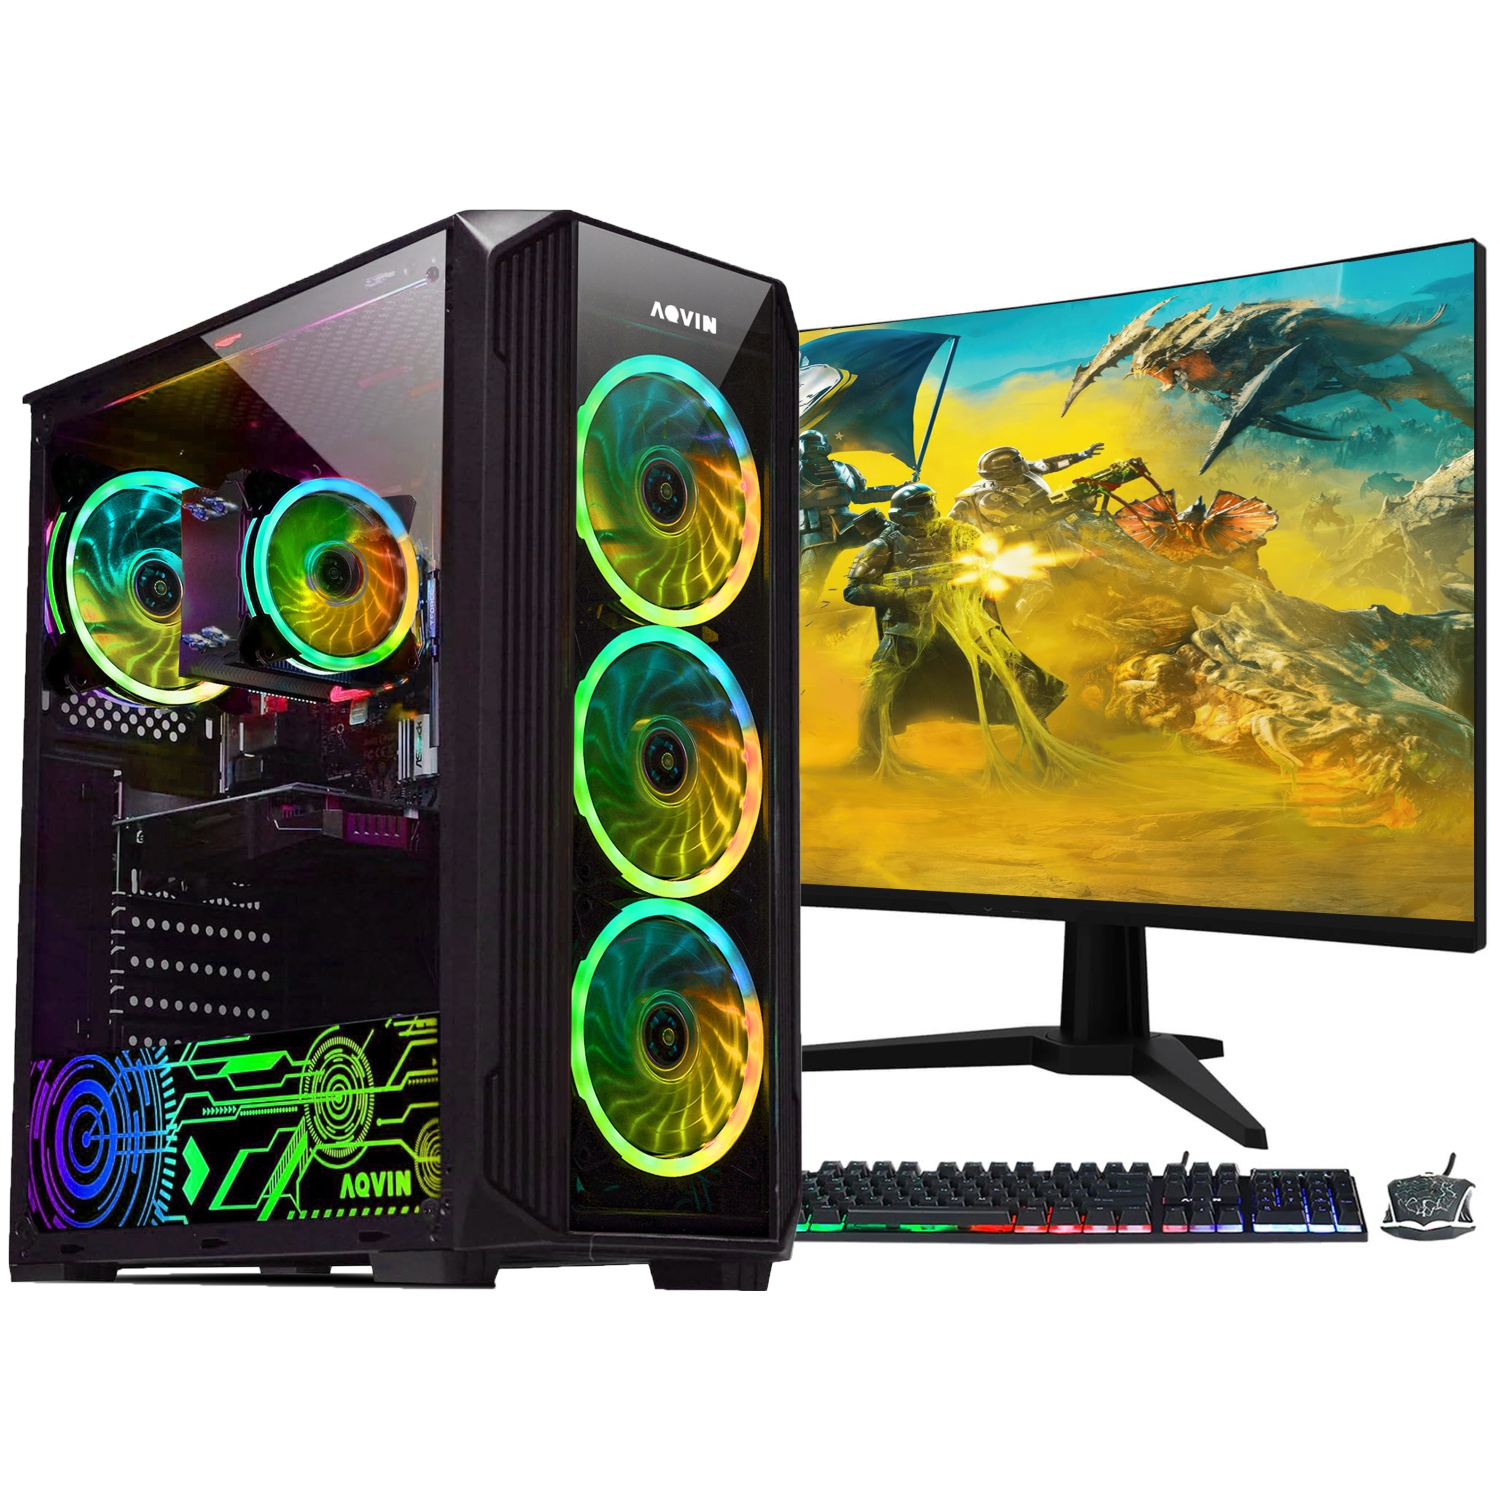 Refurbished (Excellent) AQVIN Gaming PC Intel Core i7 Processor upto 4.0Ghz 32GB RAM 2TB SSD RTX 3060 12GB Windows 10 Pro New 27 inch Curved Gaming Monitor WIFI - Only at Best Buy